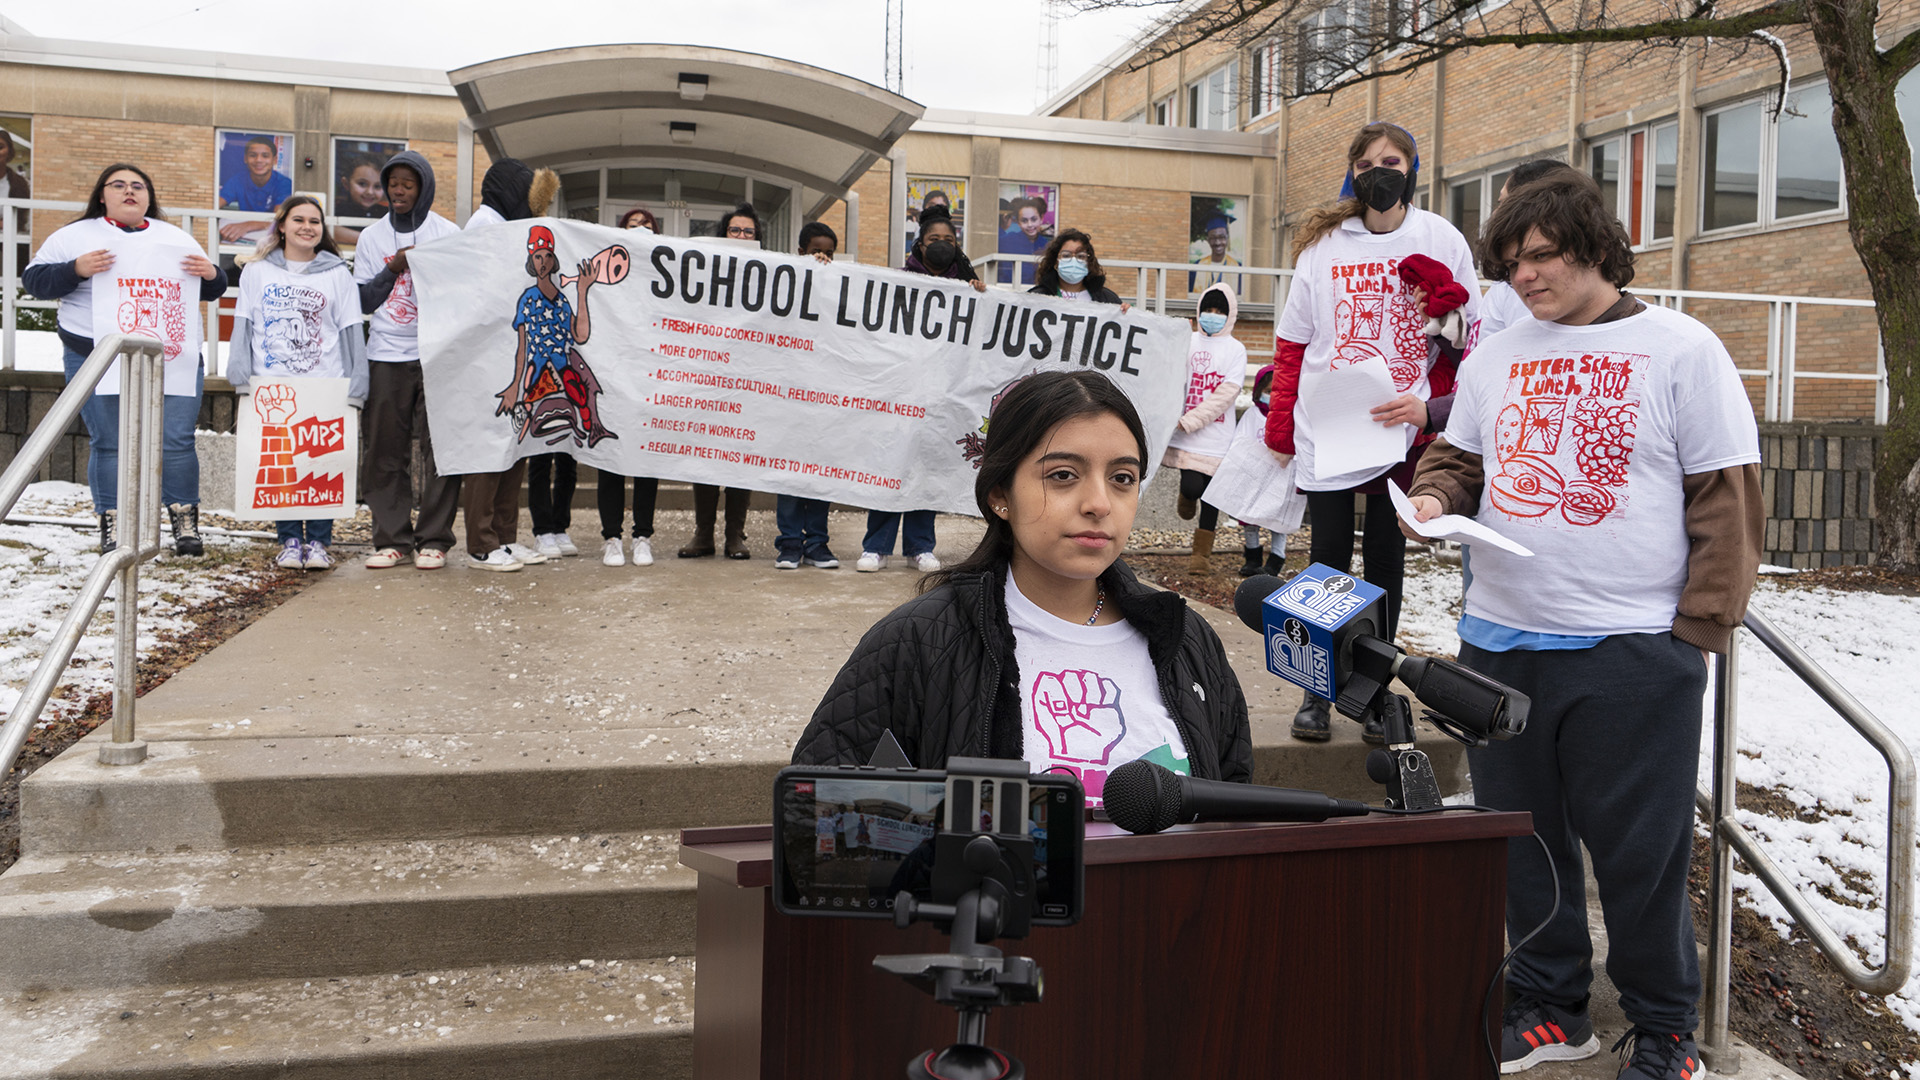 A student stands at a podium with outfitted with two microphones and in front of a mobile phone recording video, and in front of more students standing on the a short concrete staircase and sidewalk who are holding posters and a sign reading "School Lunch Justice," with a school building in the background.